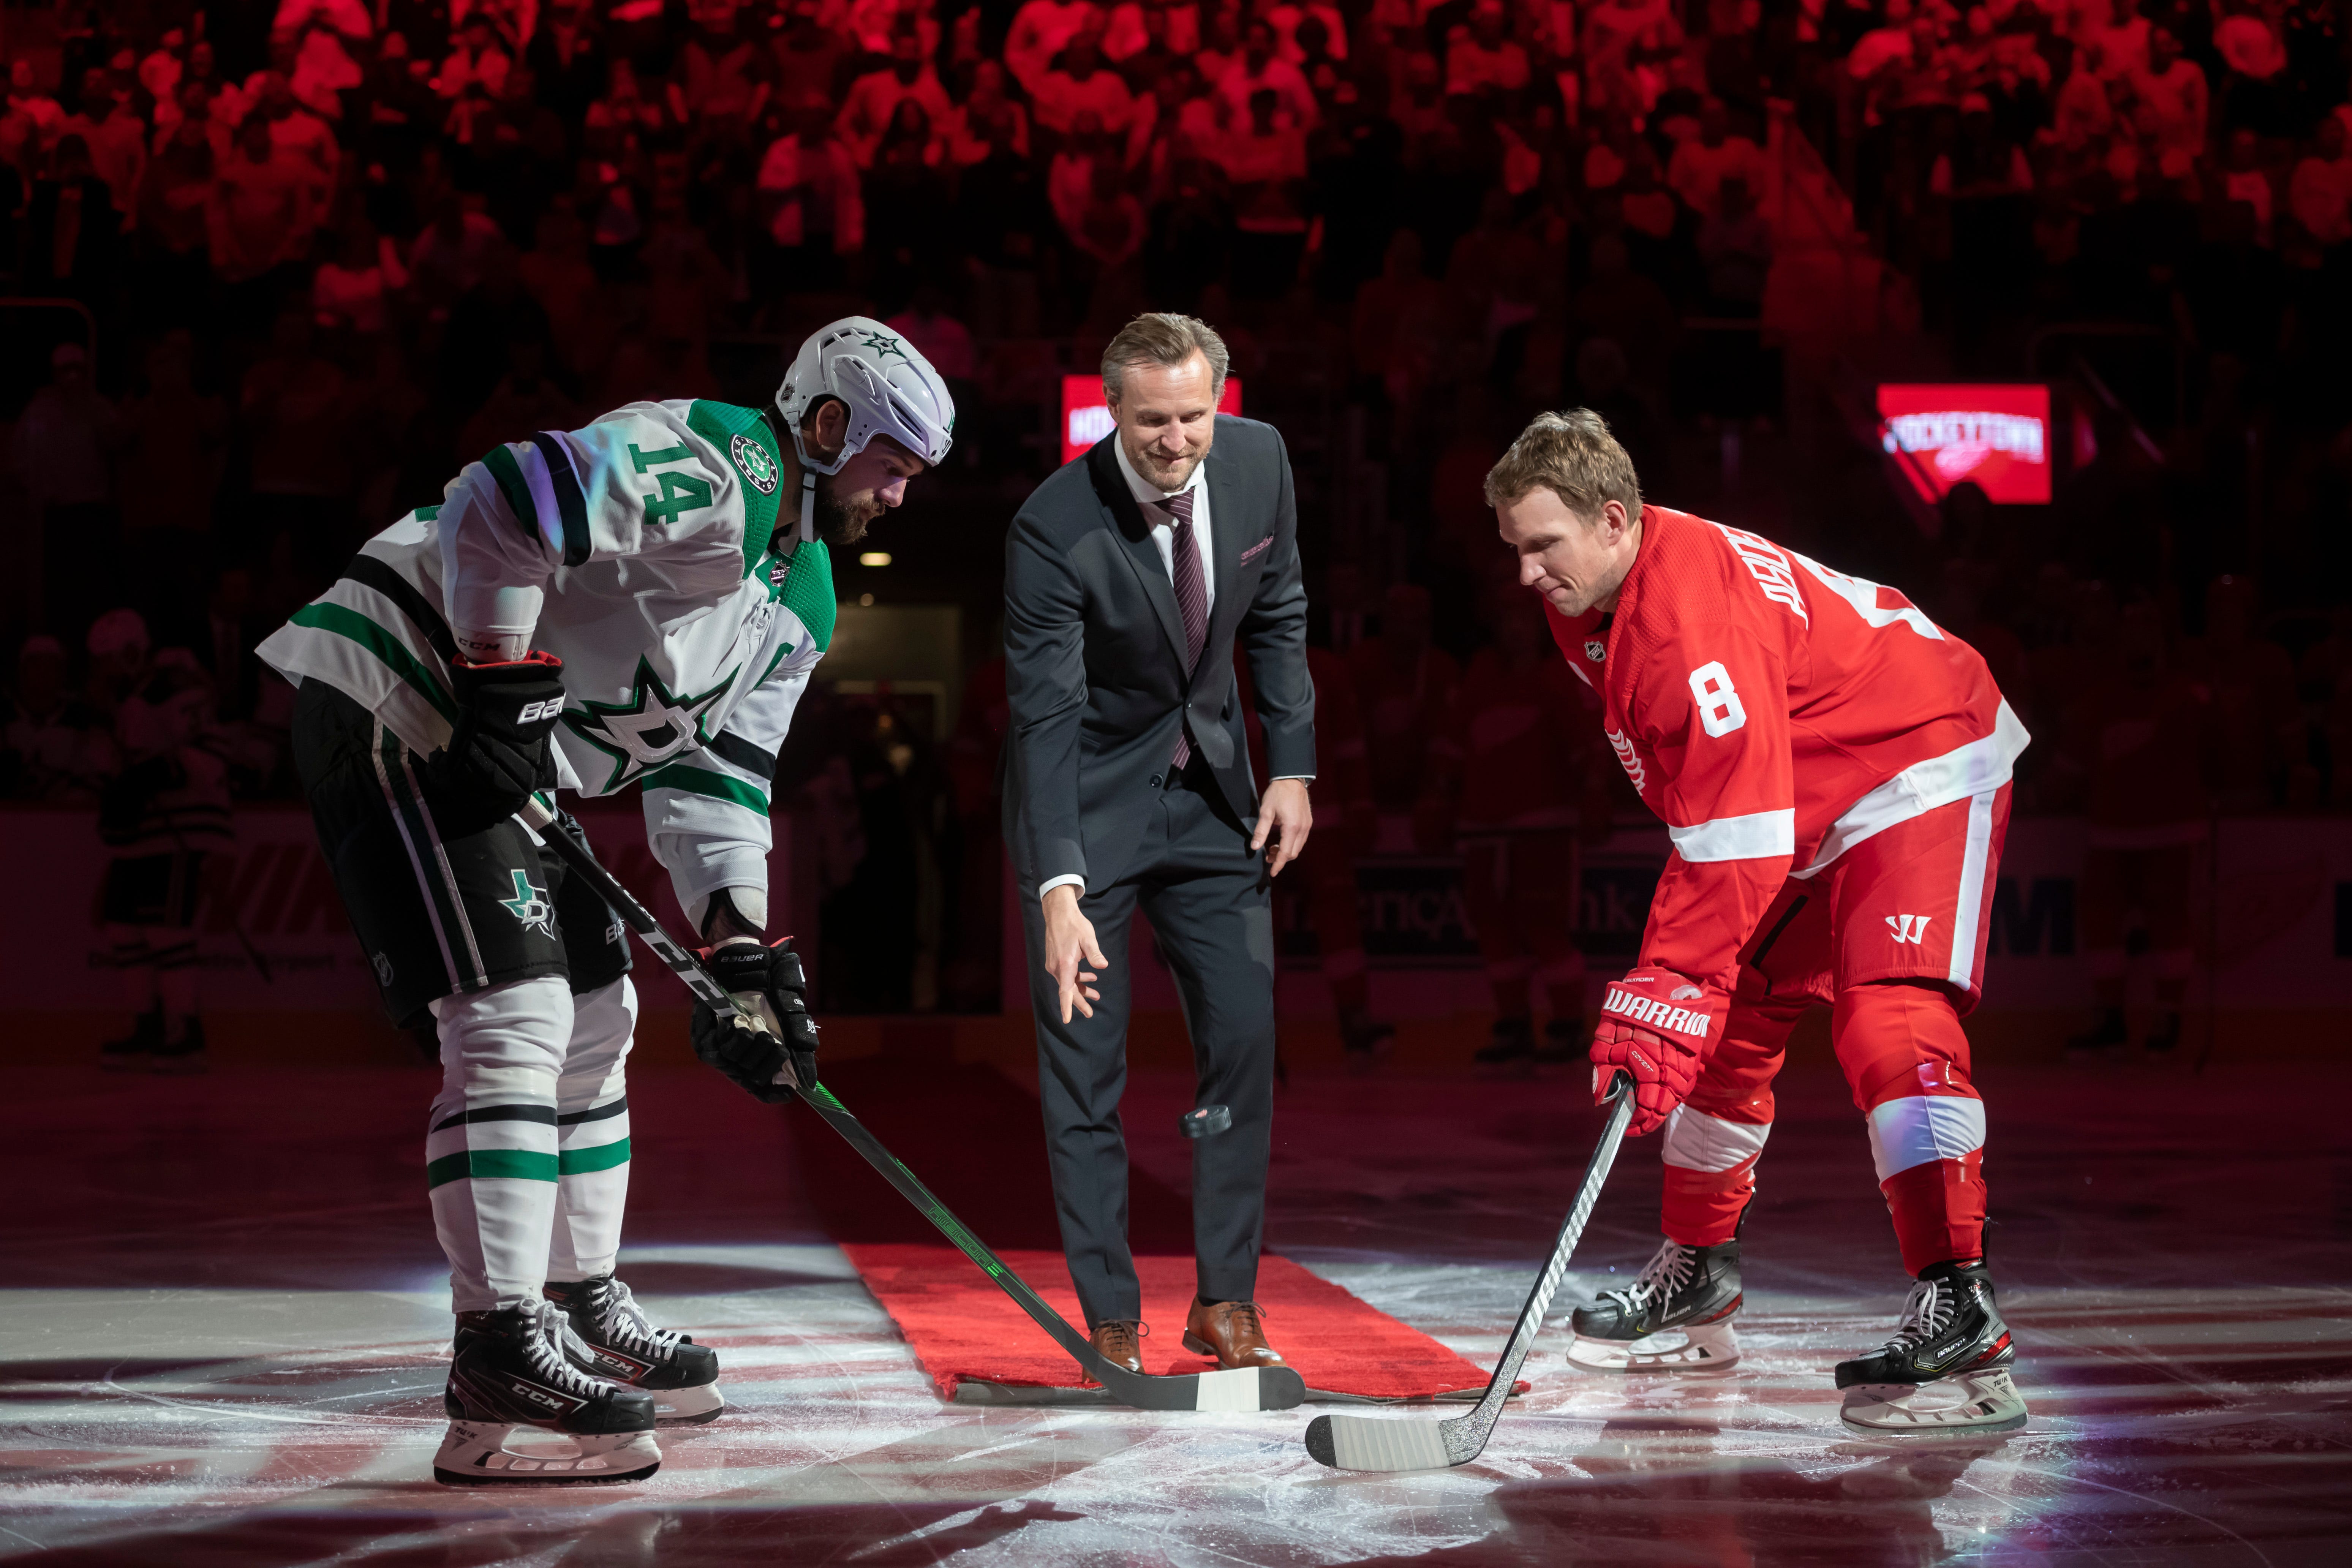 Former Red Wings defenseman Niklas Kronwall participates in a ceremonial puck drop with Dallas left wing Jamie Benn and Detroit left wing Justin Abdelkader before the start of the game.